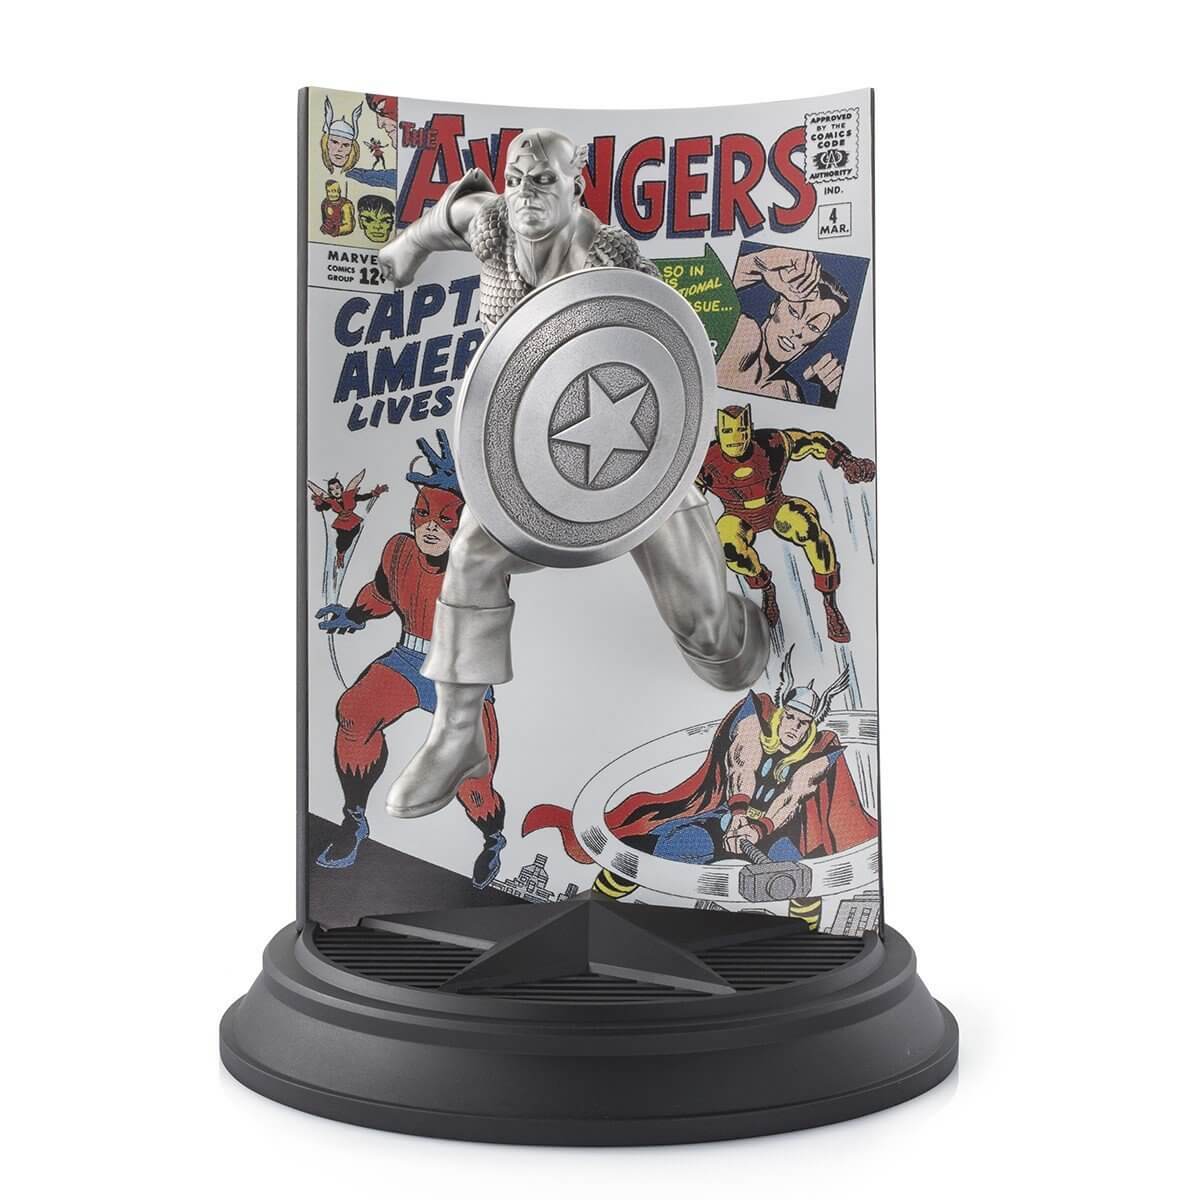 Captain America The Avengers #4 Limited Edition Figurine - Marvel Statue